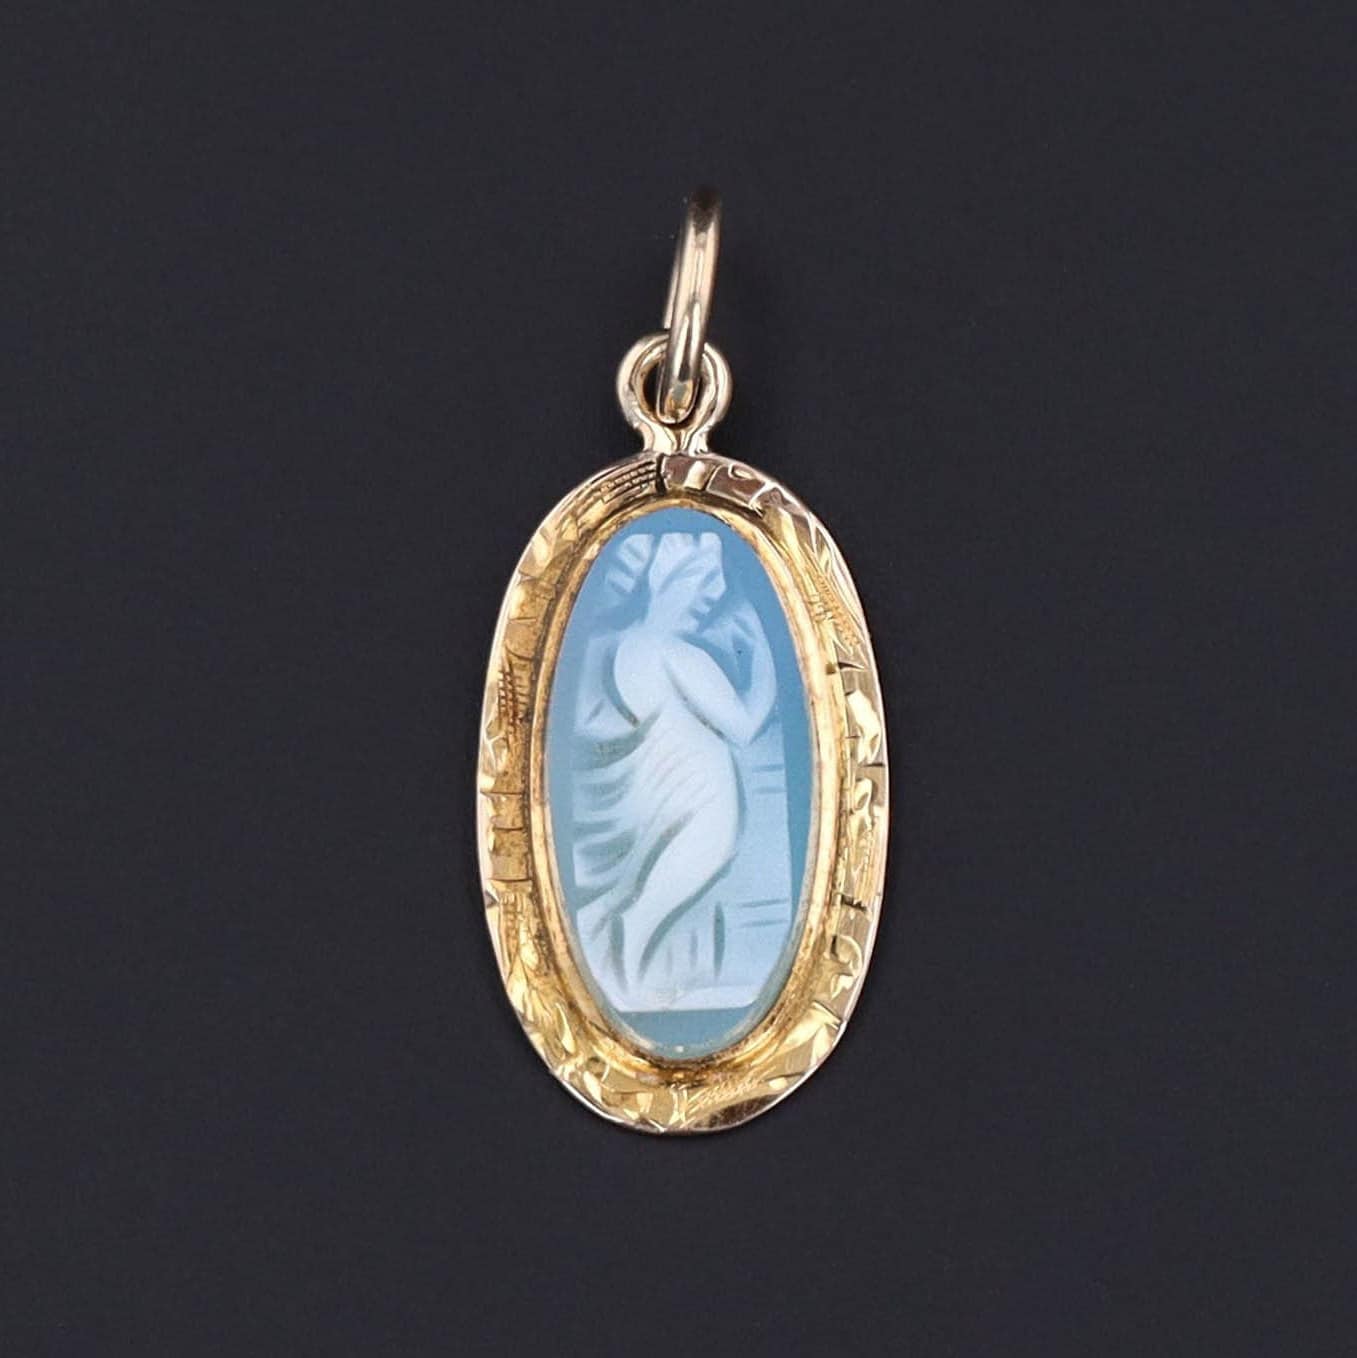 Antique Agate Cameo Pendant of 10k Gold